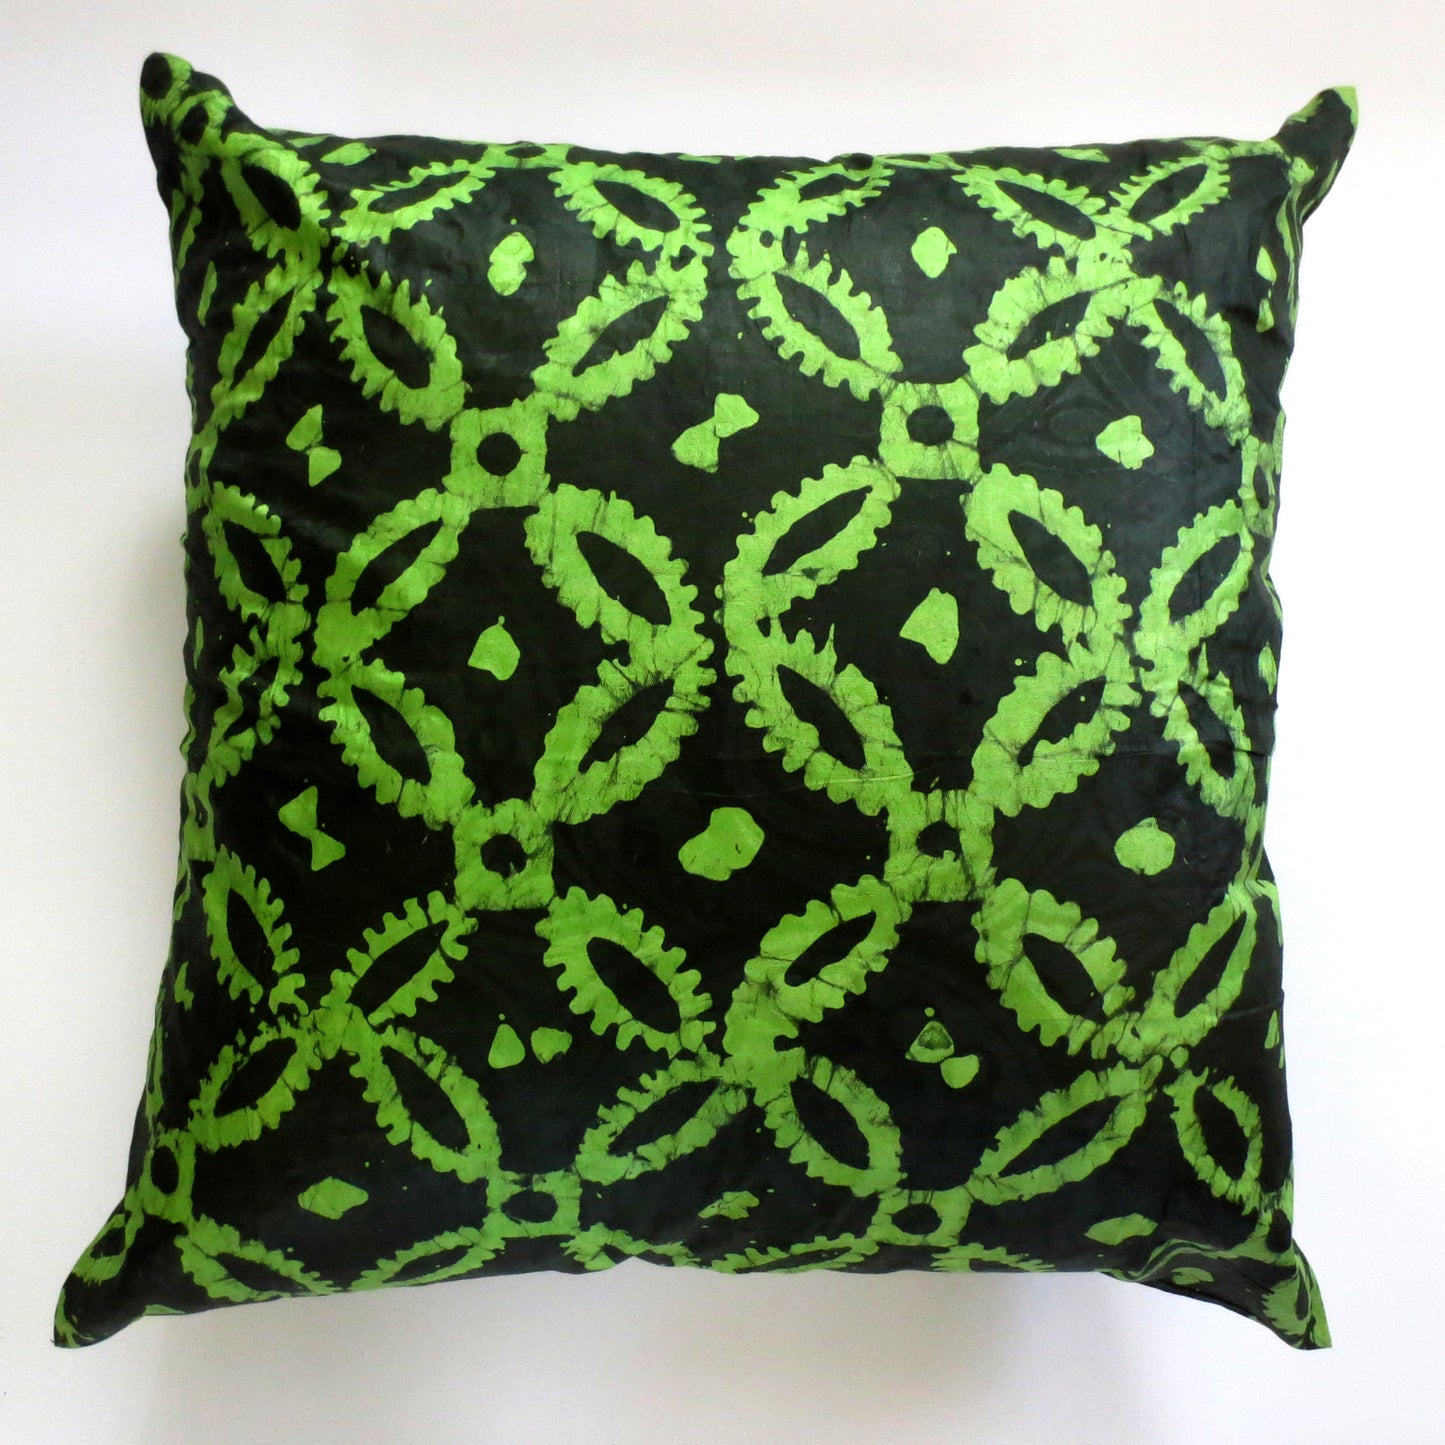 Green Limes 20x20 Pillow Cover